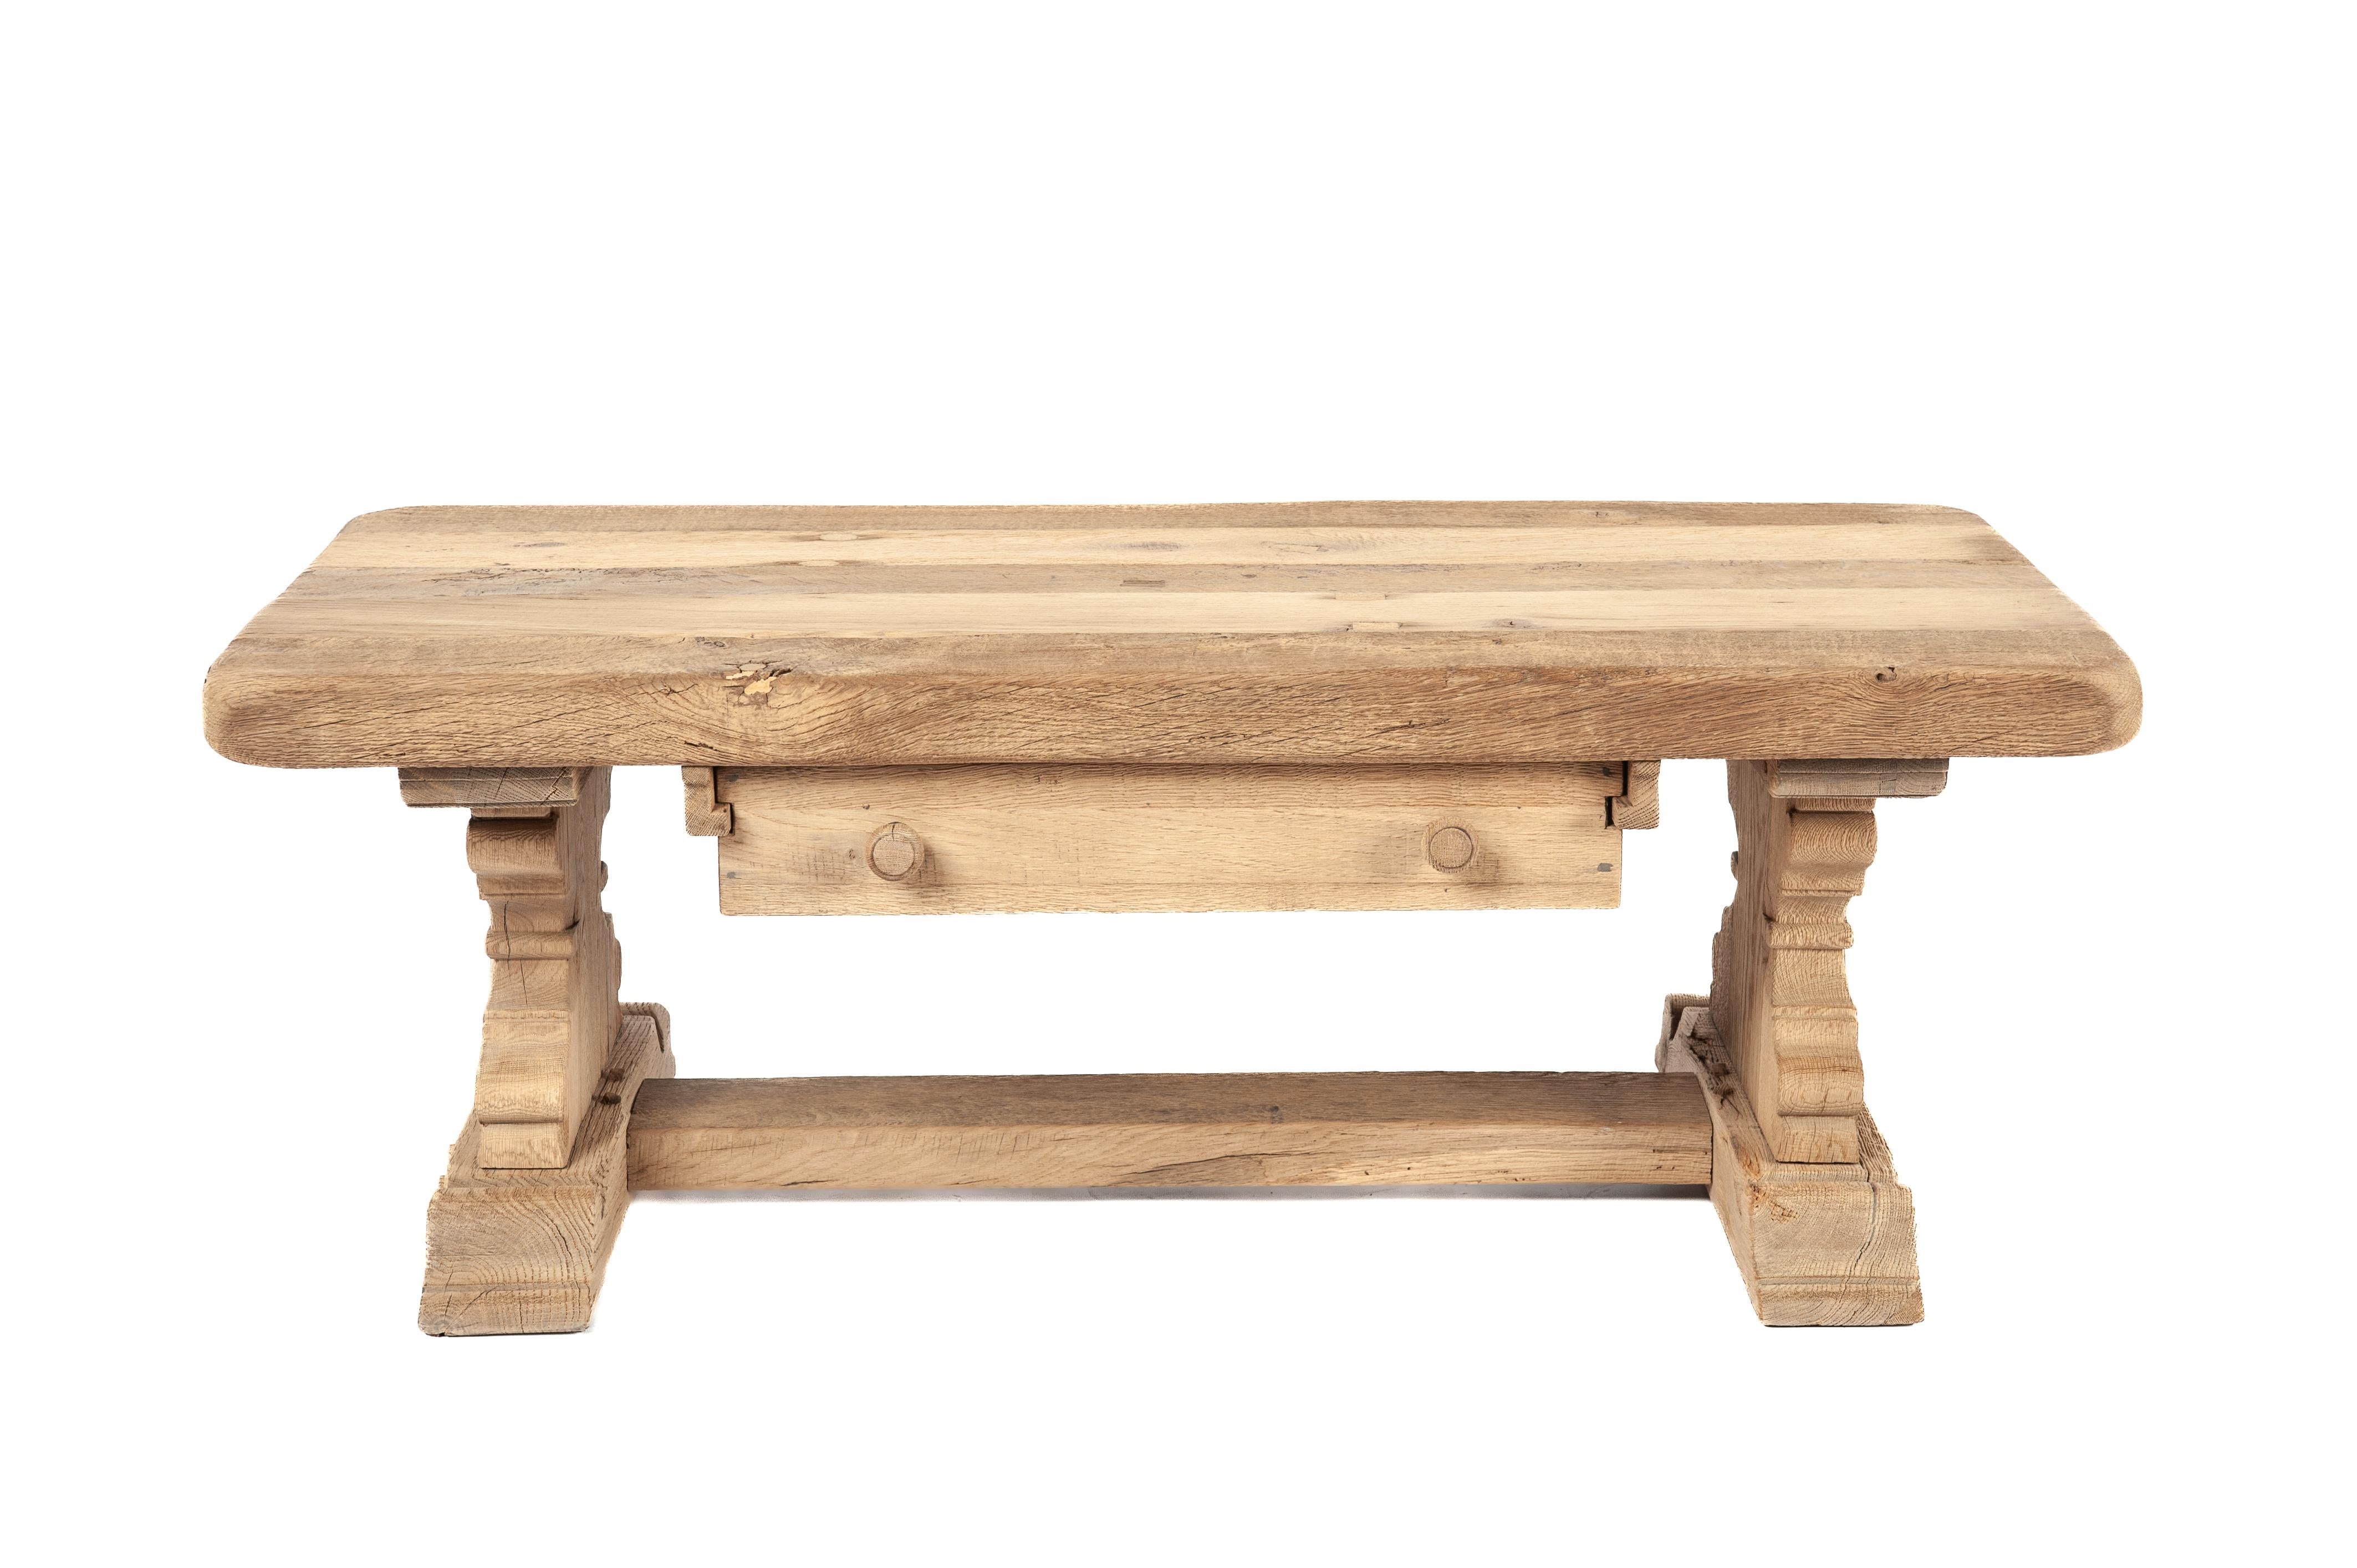 On offer here is a beautiful vintage coffee table, meticulously crafted from reclaimed oak wood dating back to the 1960s. This rustic piece was built by the esteemed Piet Rombouts & Sons furniture workshop, a legacy proudly continued by our family.